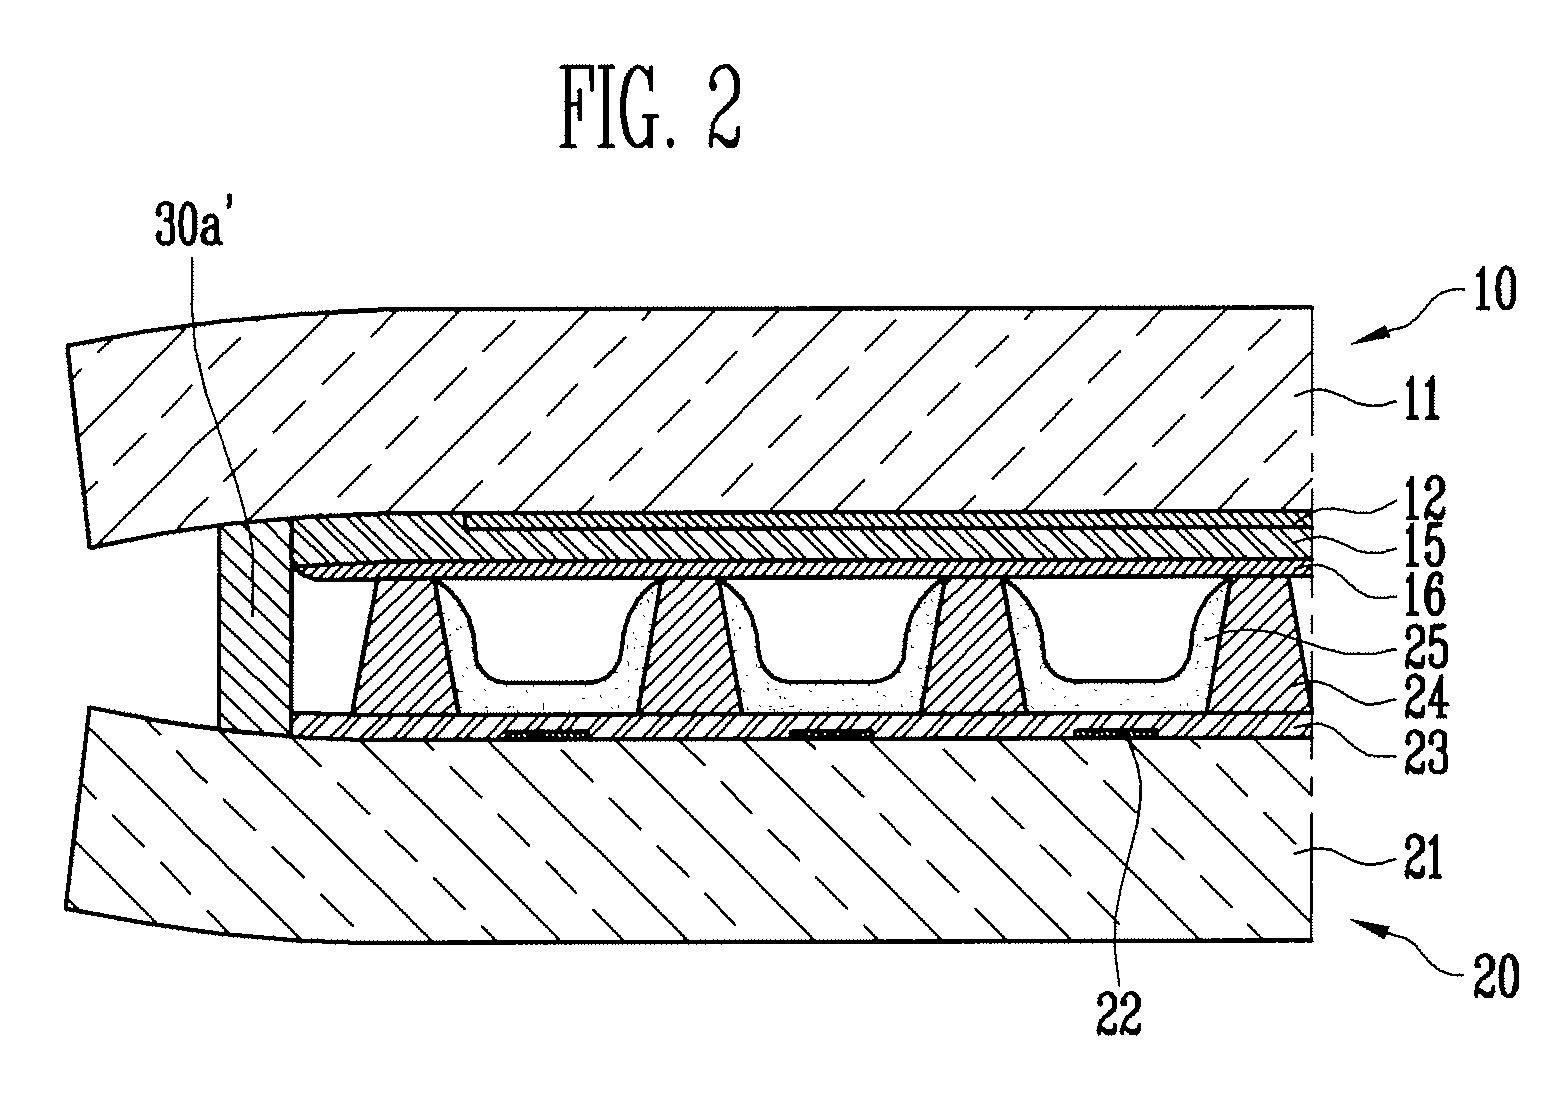 Plasma display panel and manufacturing method therefor